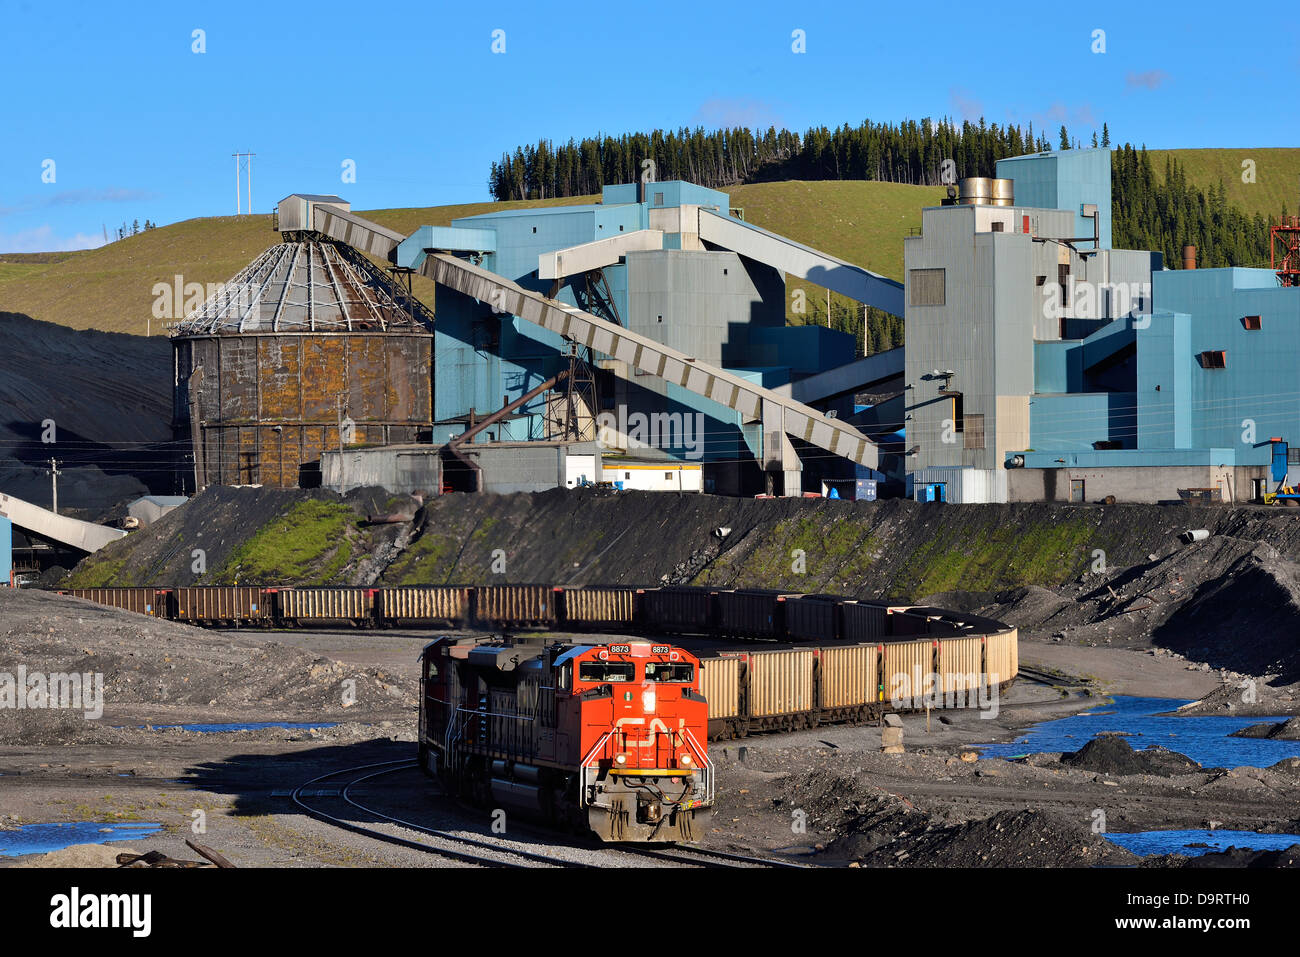 An image of a C.N. freight train being loaded with coal at a processing plant in Western Alberta, Canada. Stock Photo